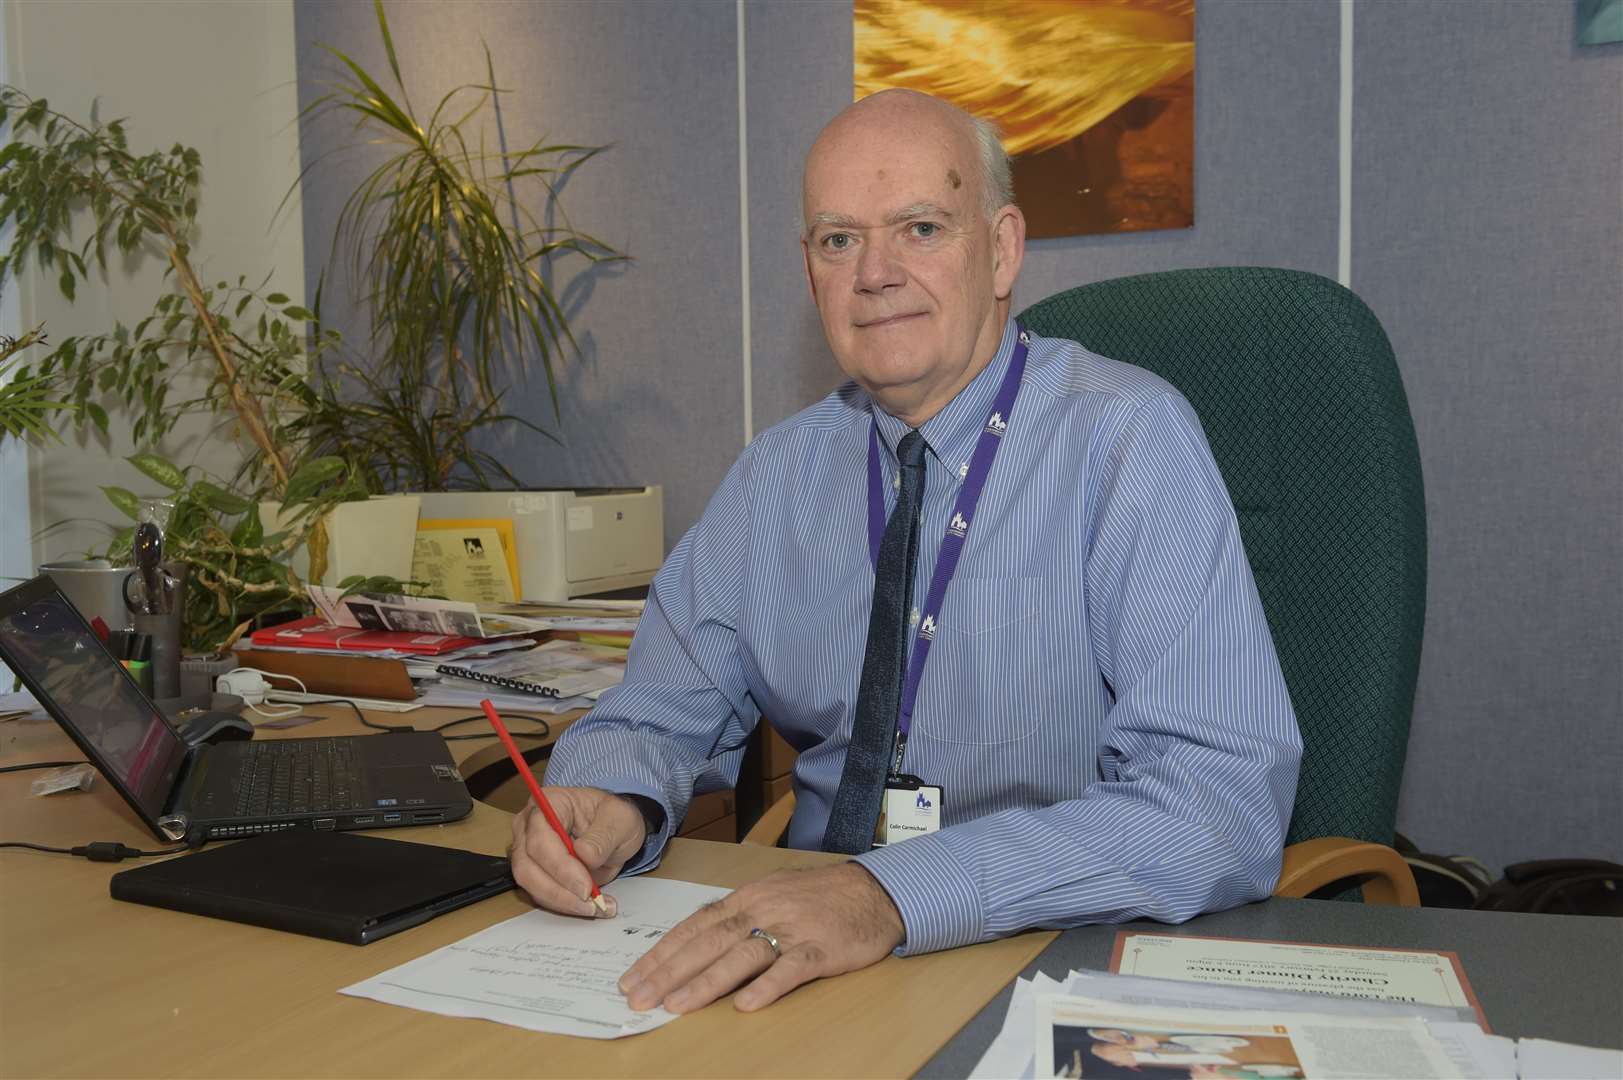 Canterbury City Council chief executive Colin Carmicheal was one of the authority bosses to make the decision.